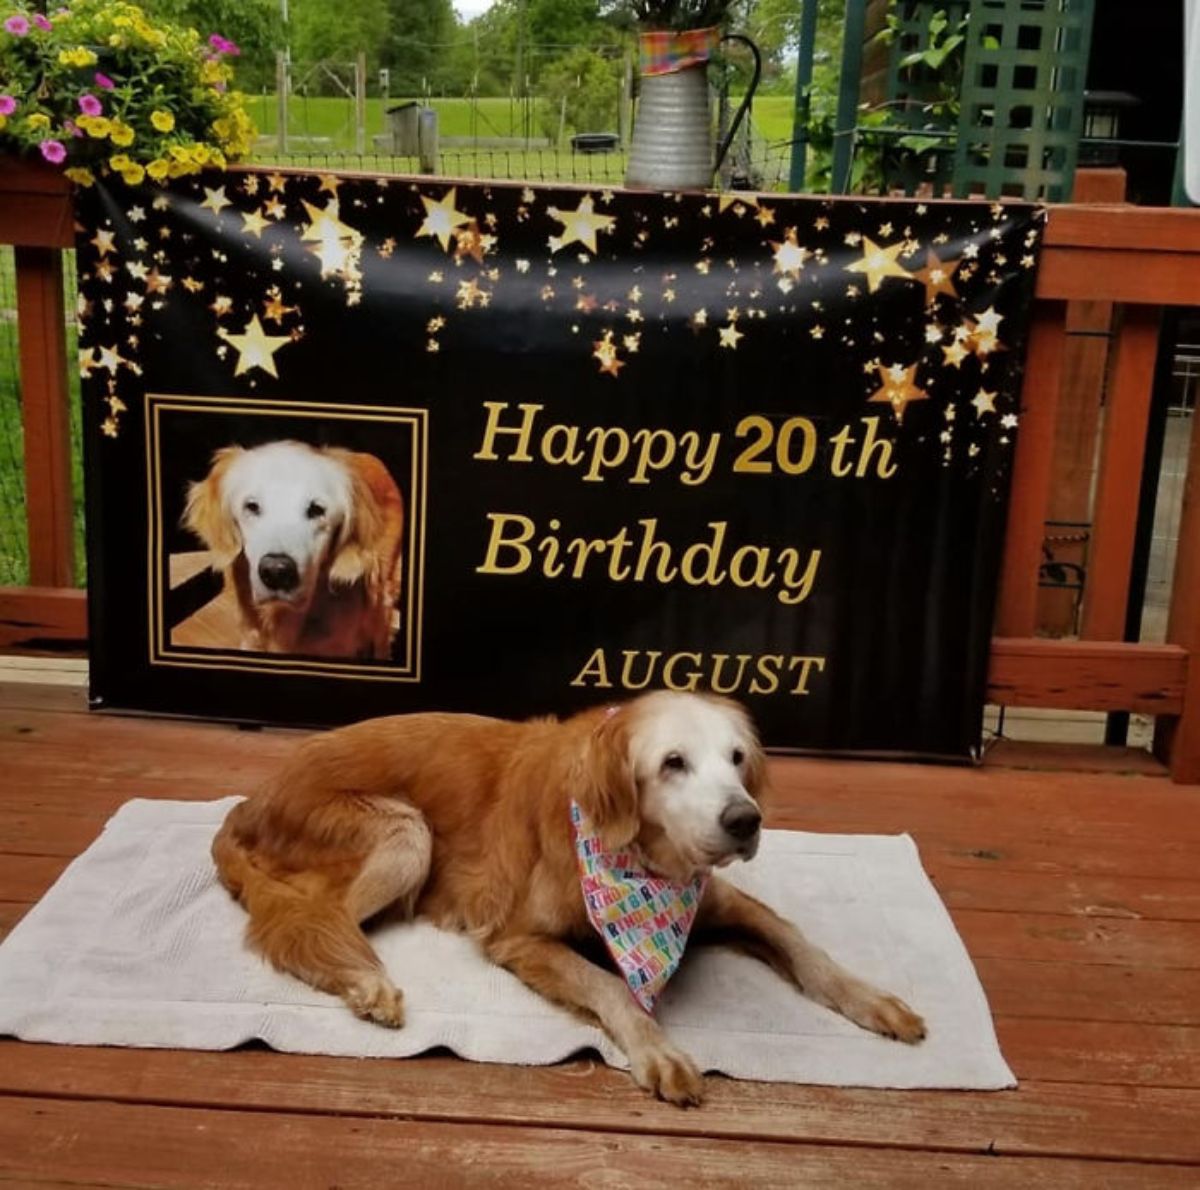 old golden retriever laying on white towel wearing a colourful bandana in front of a banner saying Happy 20th Birthday AUGUST